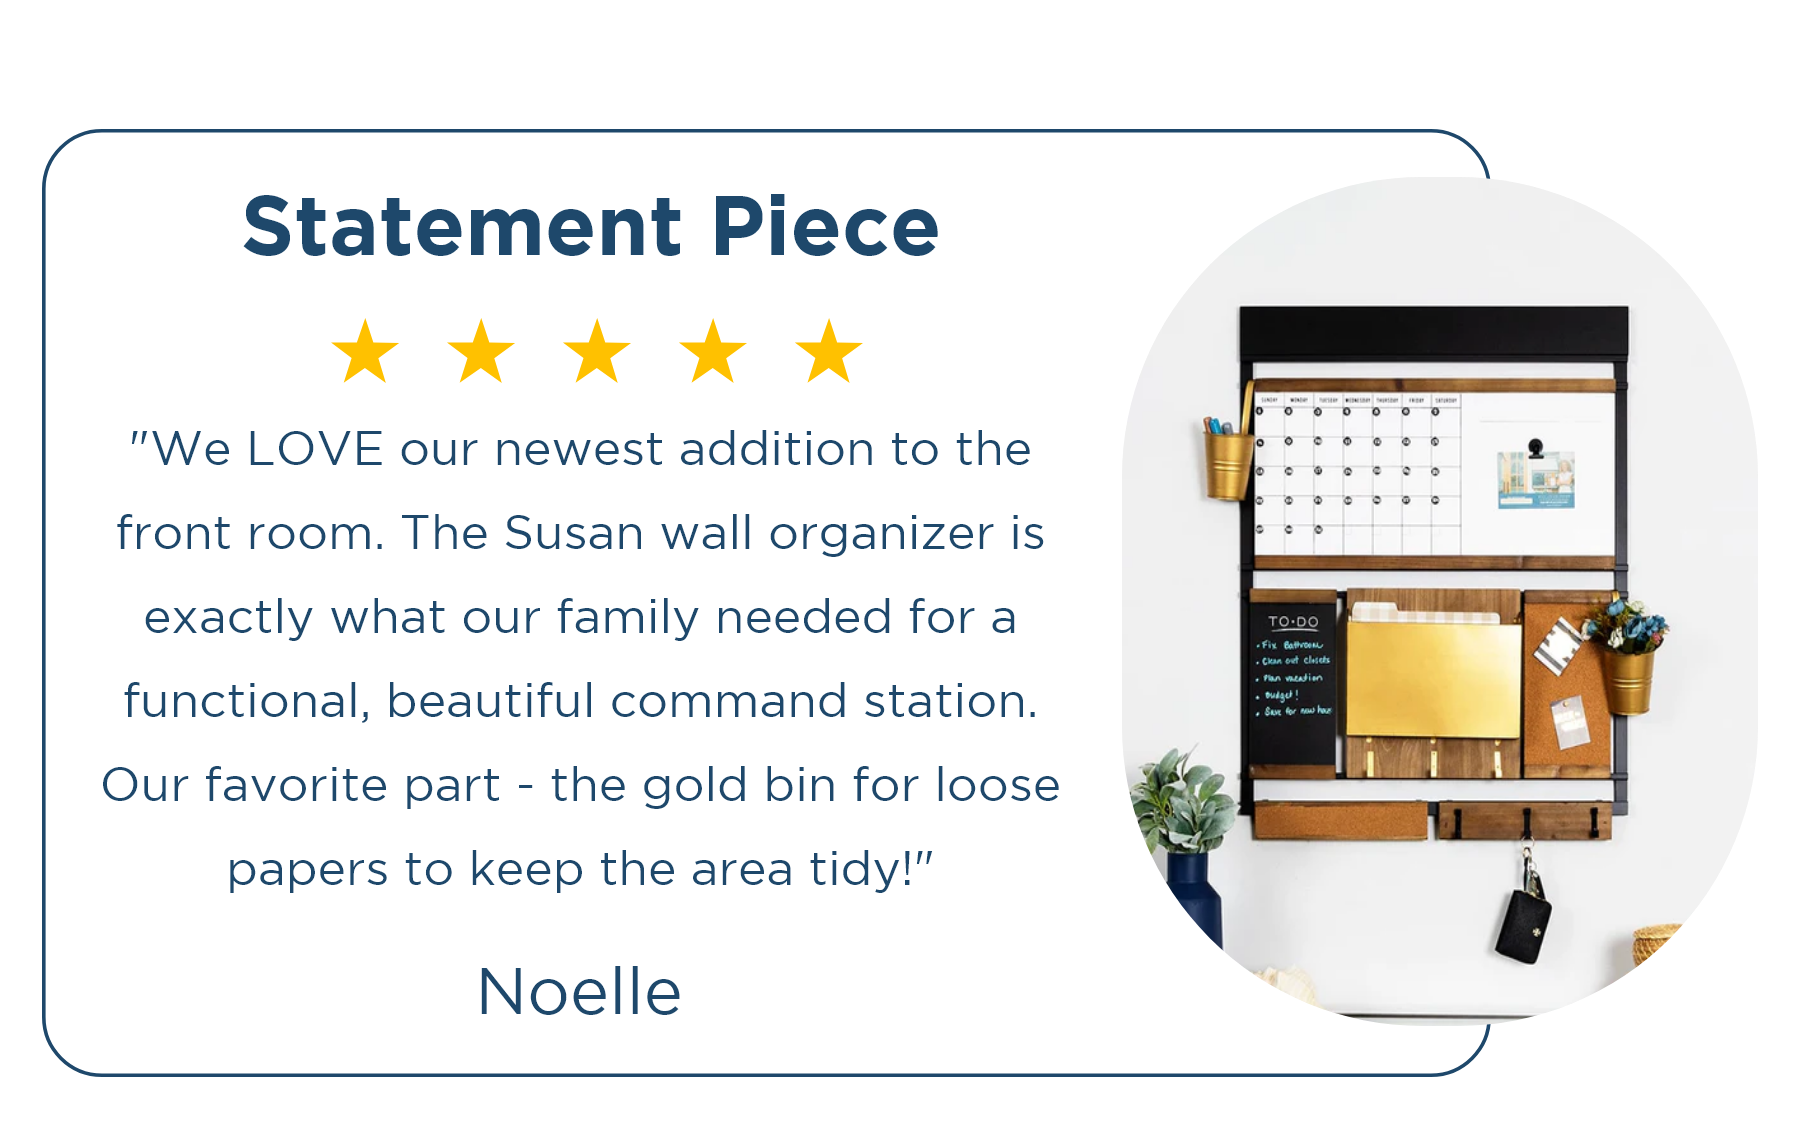 ⭐⭐⭐⭐⭐ Noelle | Statement Piece "We LOVE our newest addition to the front room. The Susan wall organizer is exactly what our family needed for a functional, beautiful command station. Our favorite part - the gold bin for loose papers to keep the area tidy!"